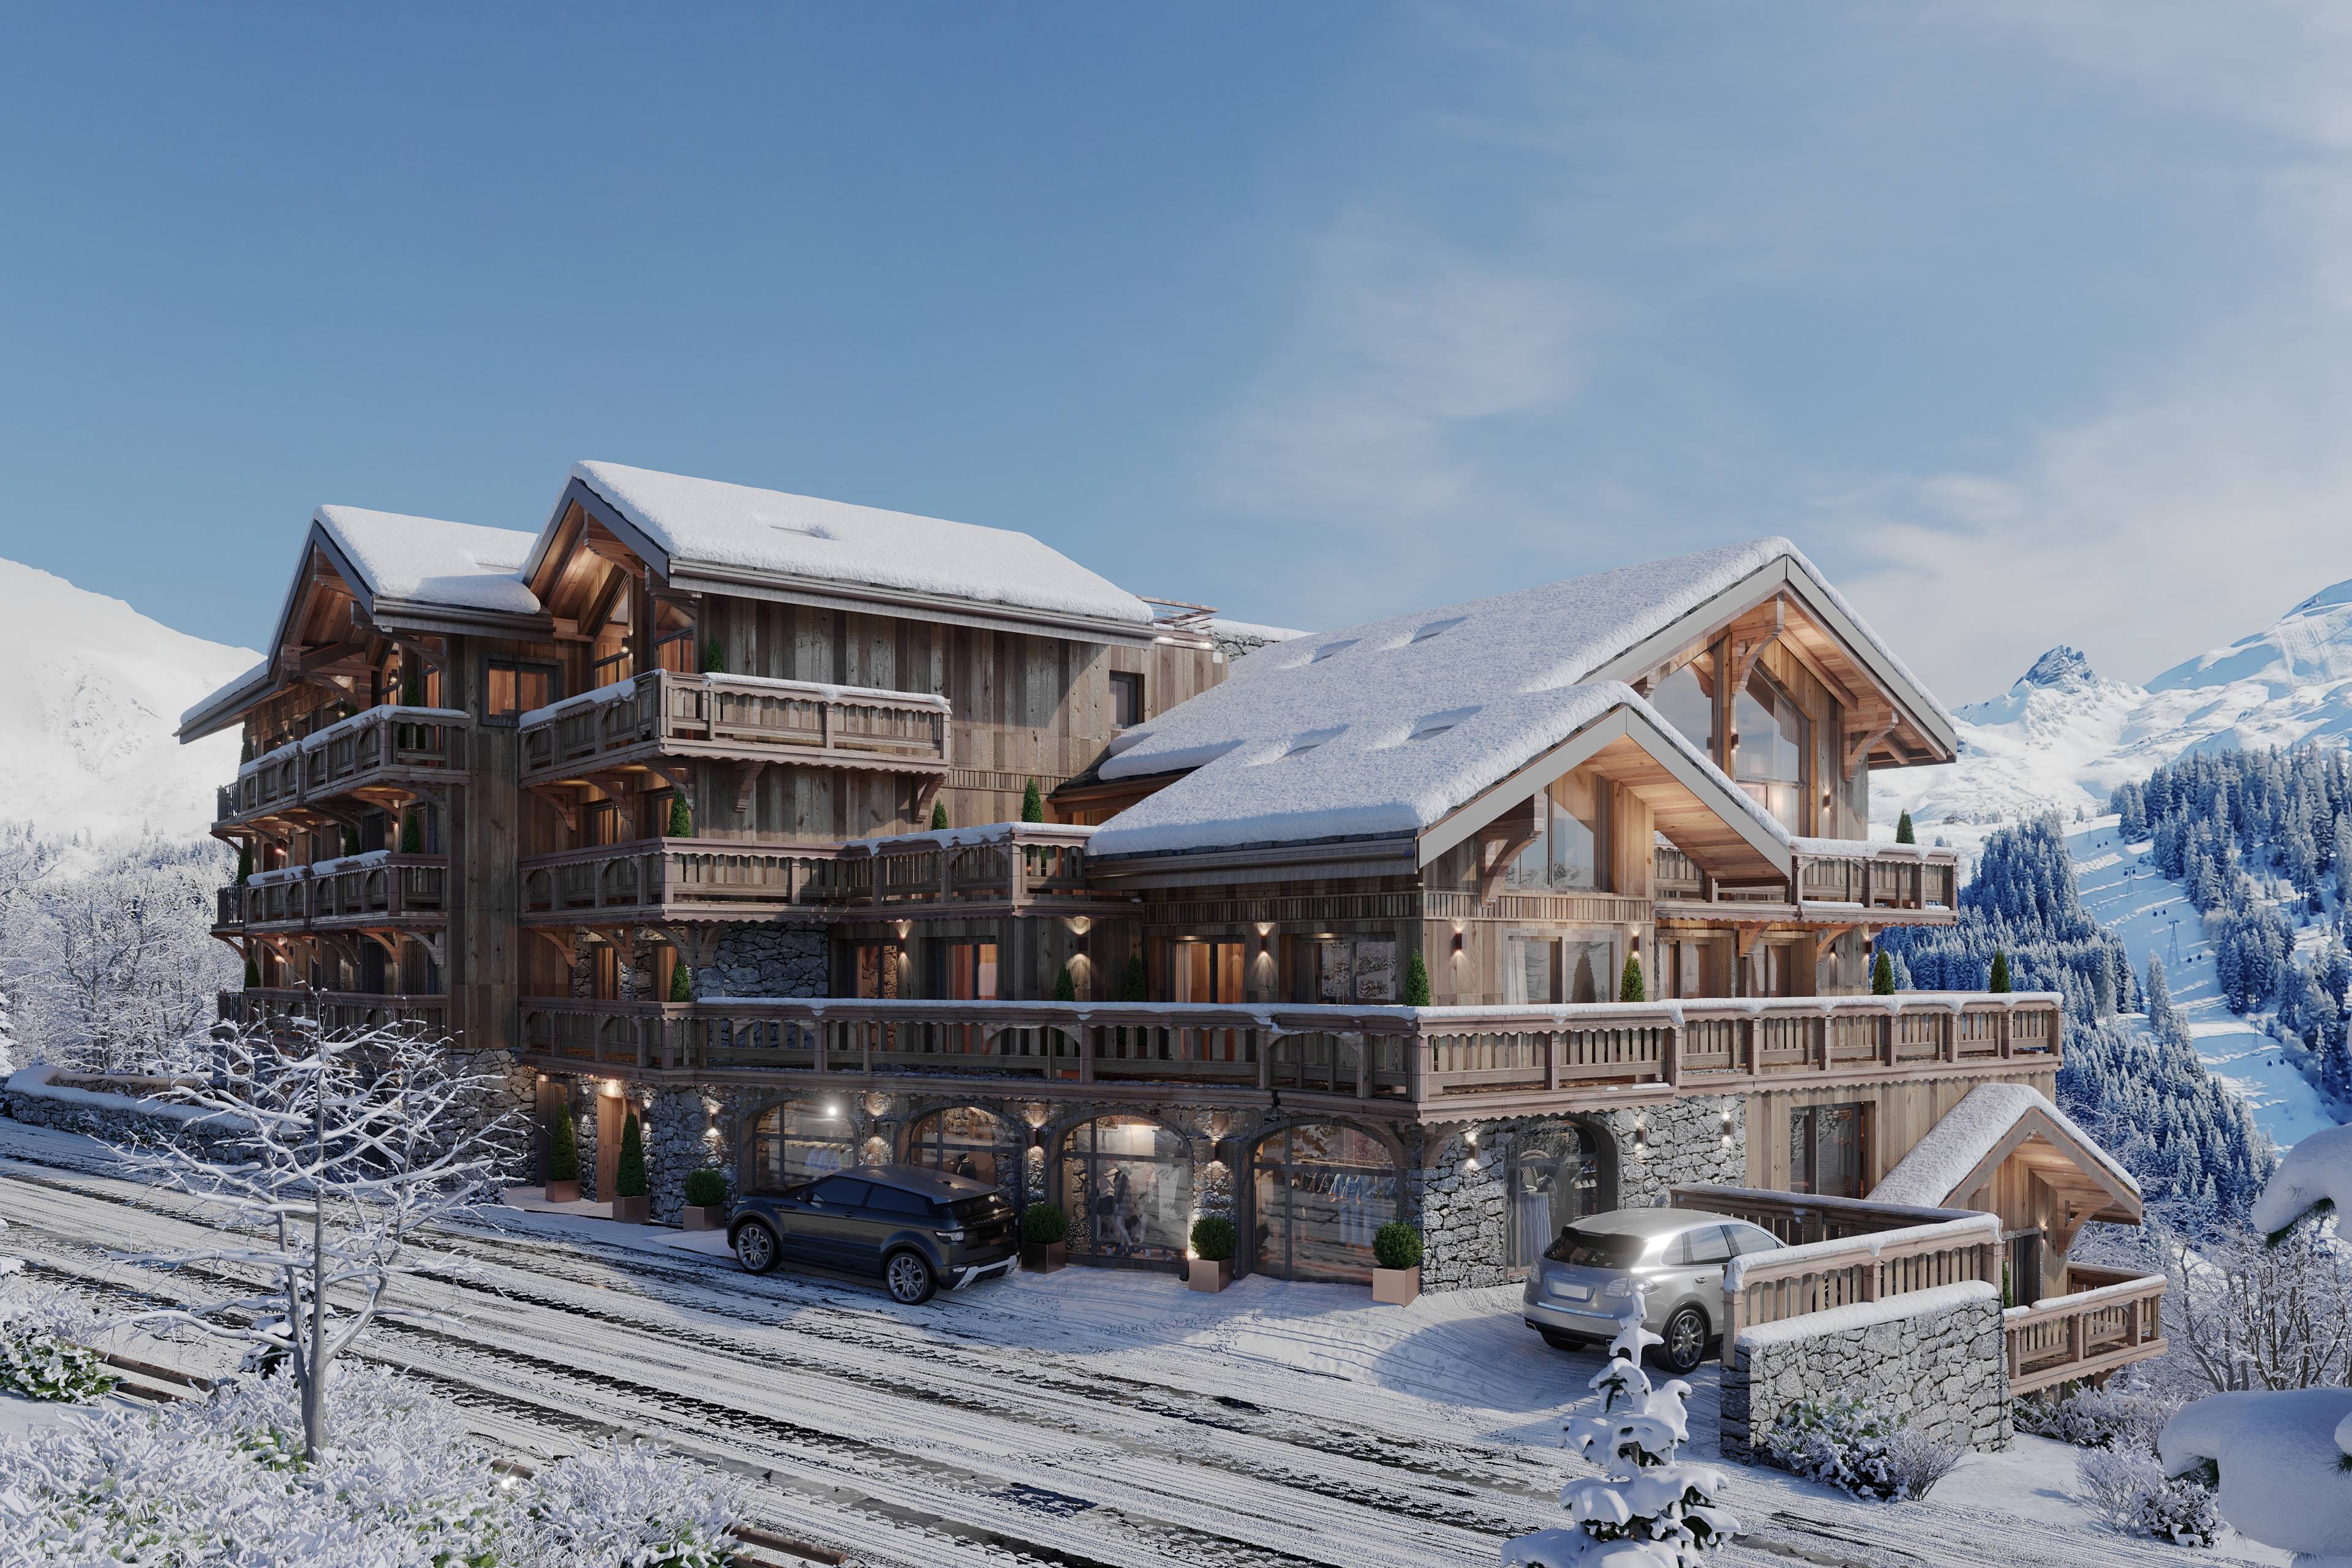 Welcome to your exquisite alpine haven in the heart of Meribel, France